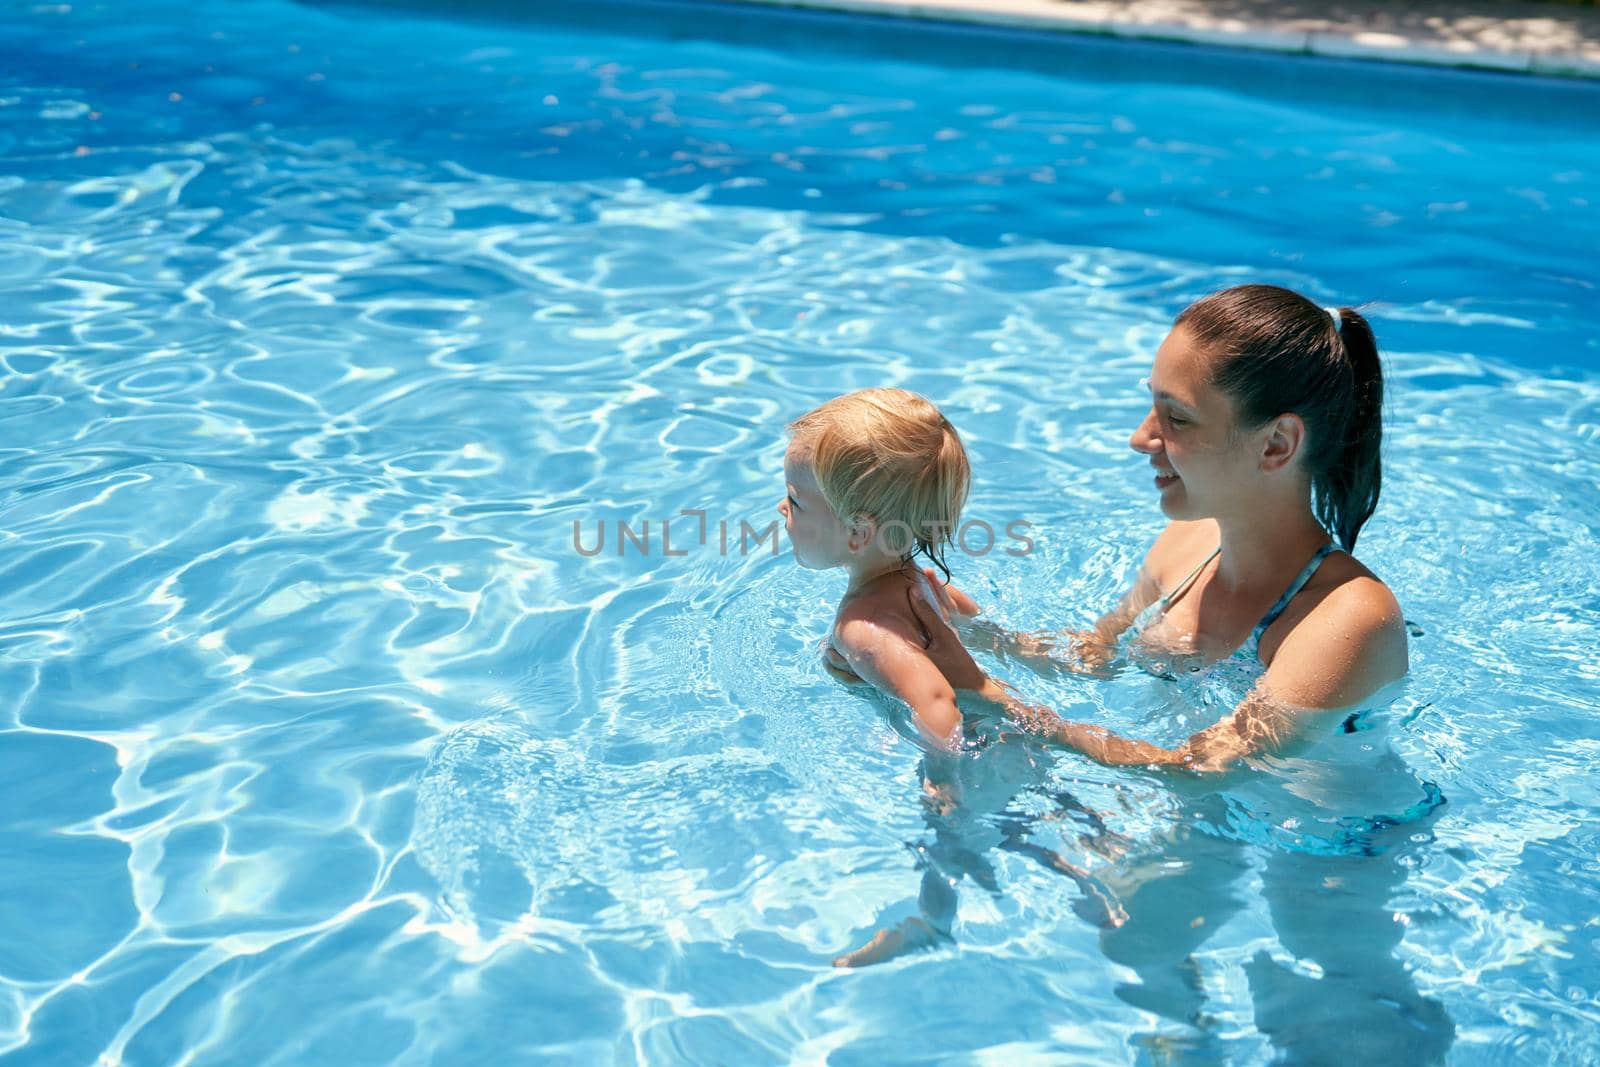 Mom teaches a small baby to swim in a pool with turquoise water by Nadtochiy